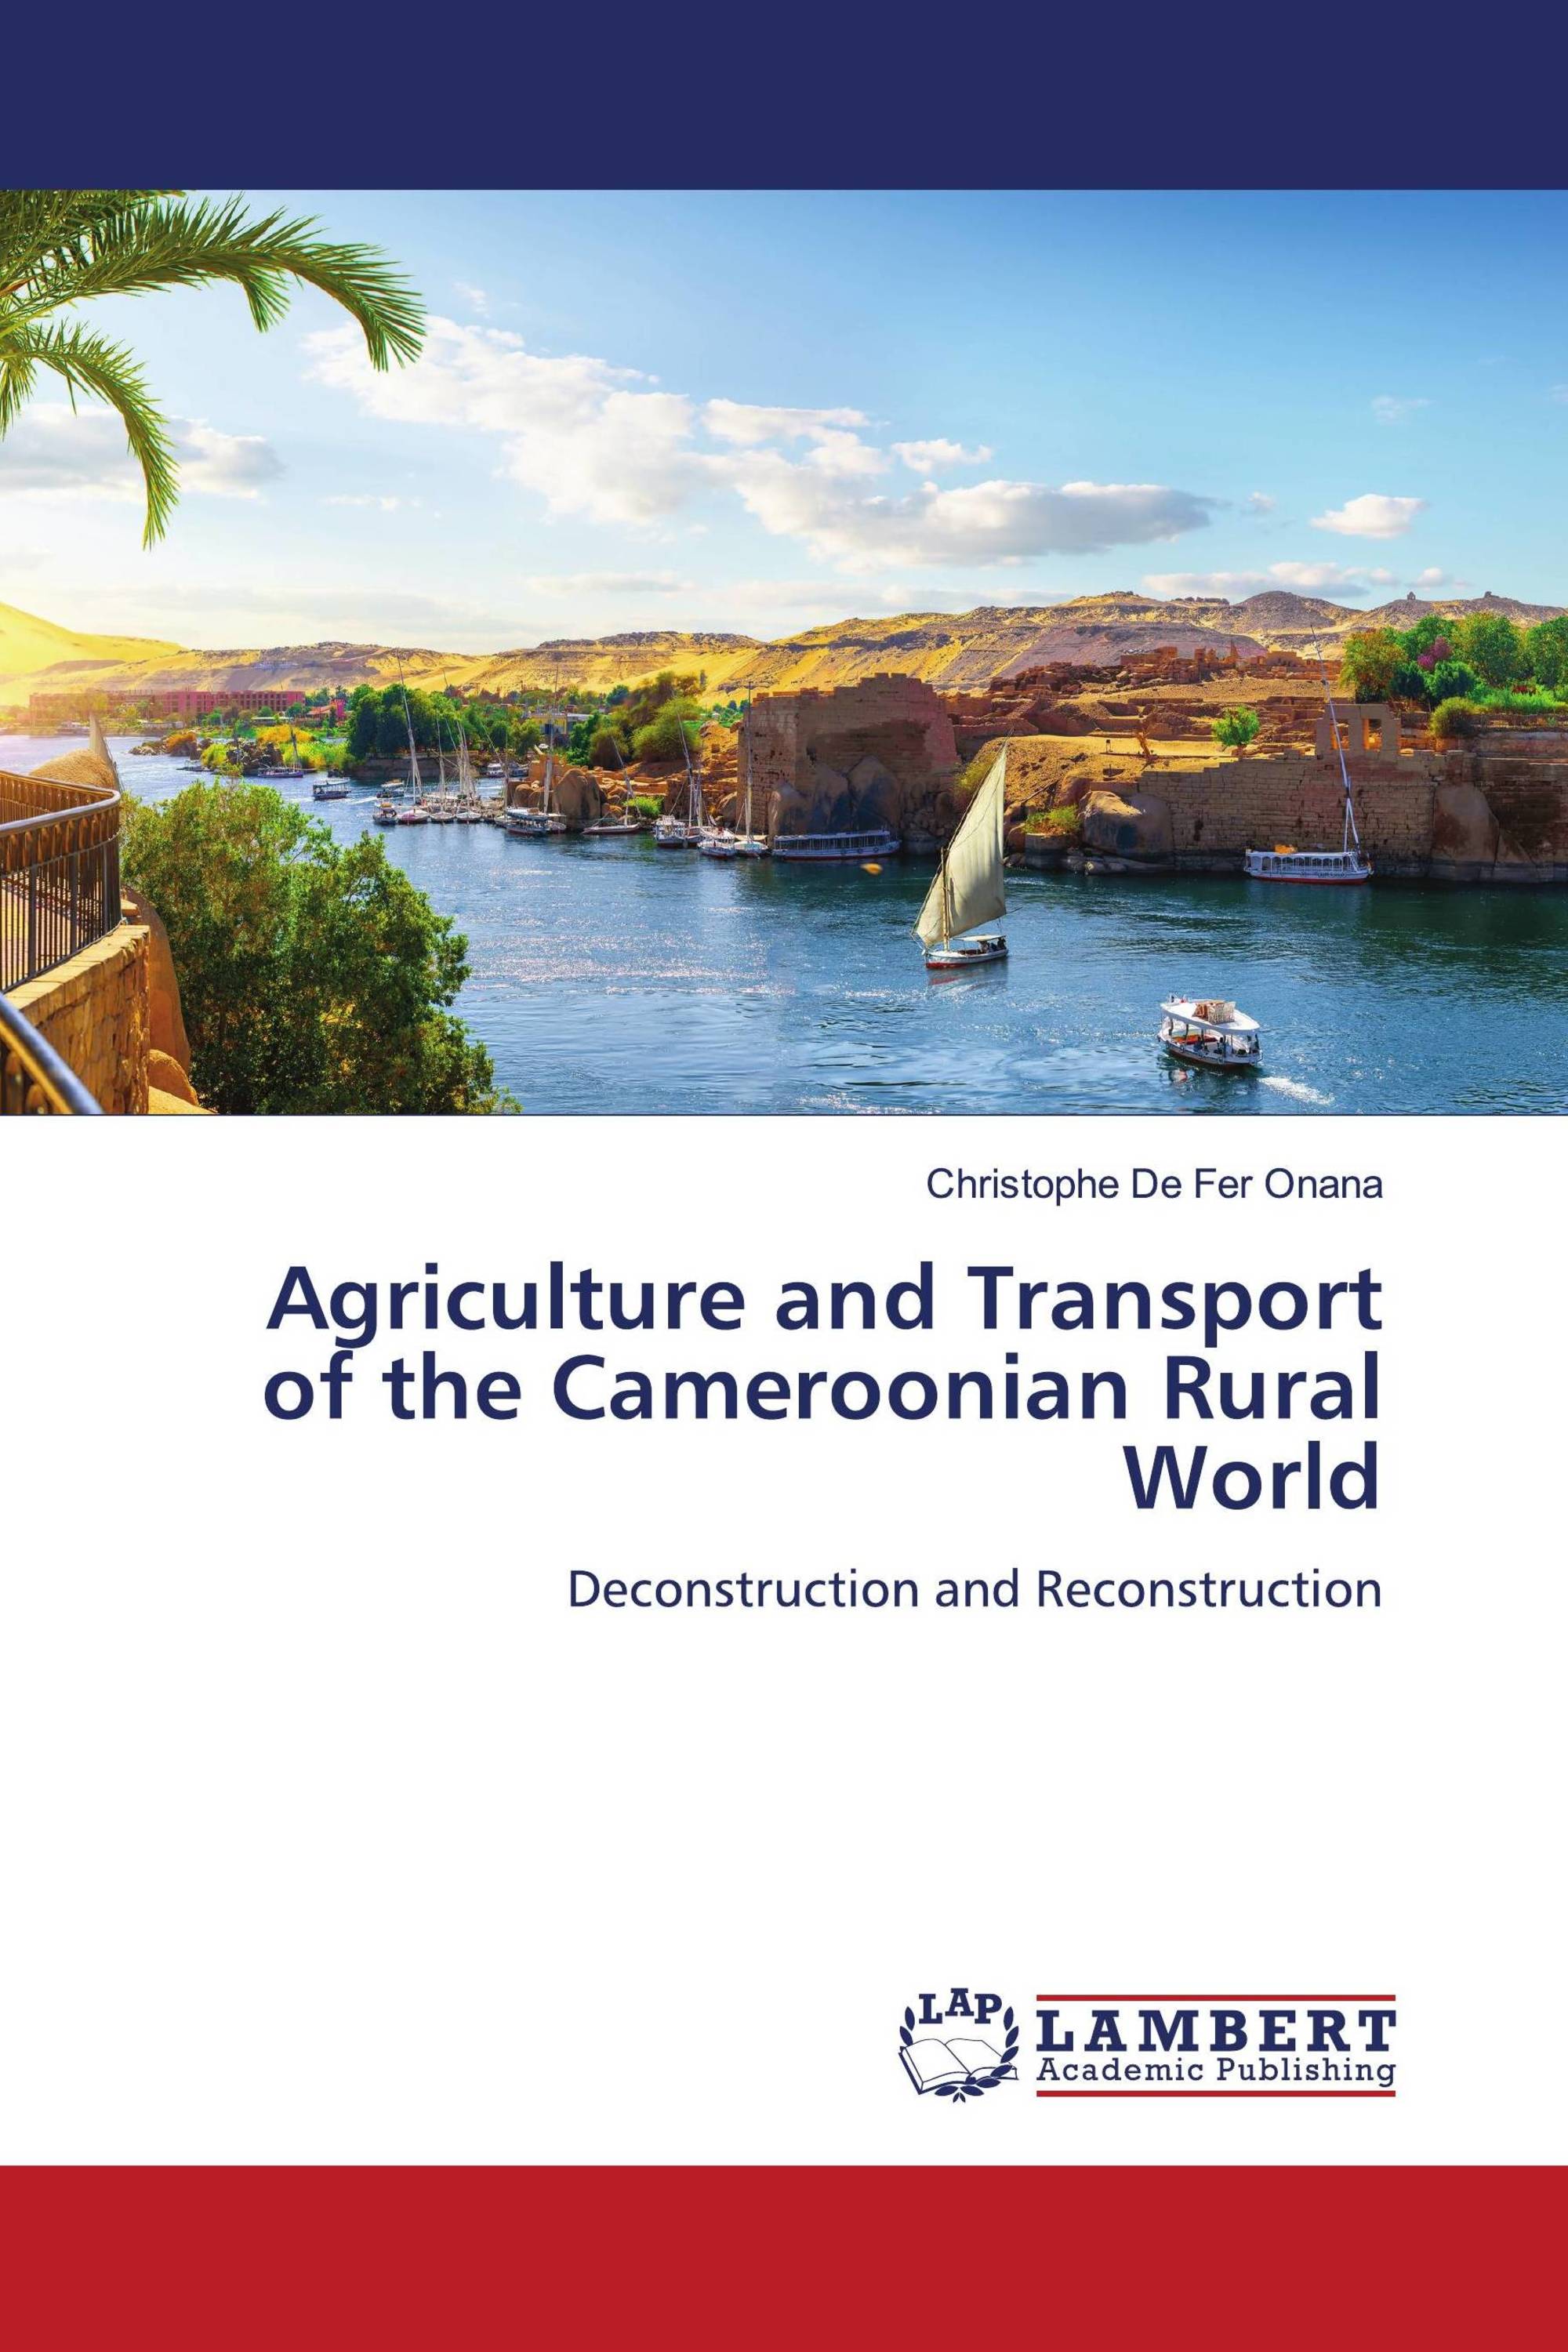 Agriculture and Transport of the Cameroonian Rural World